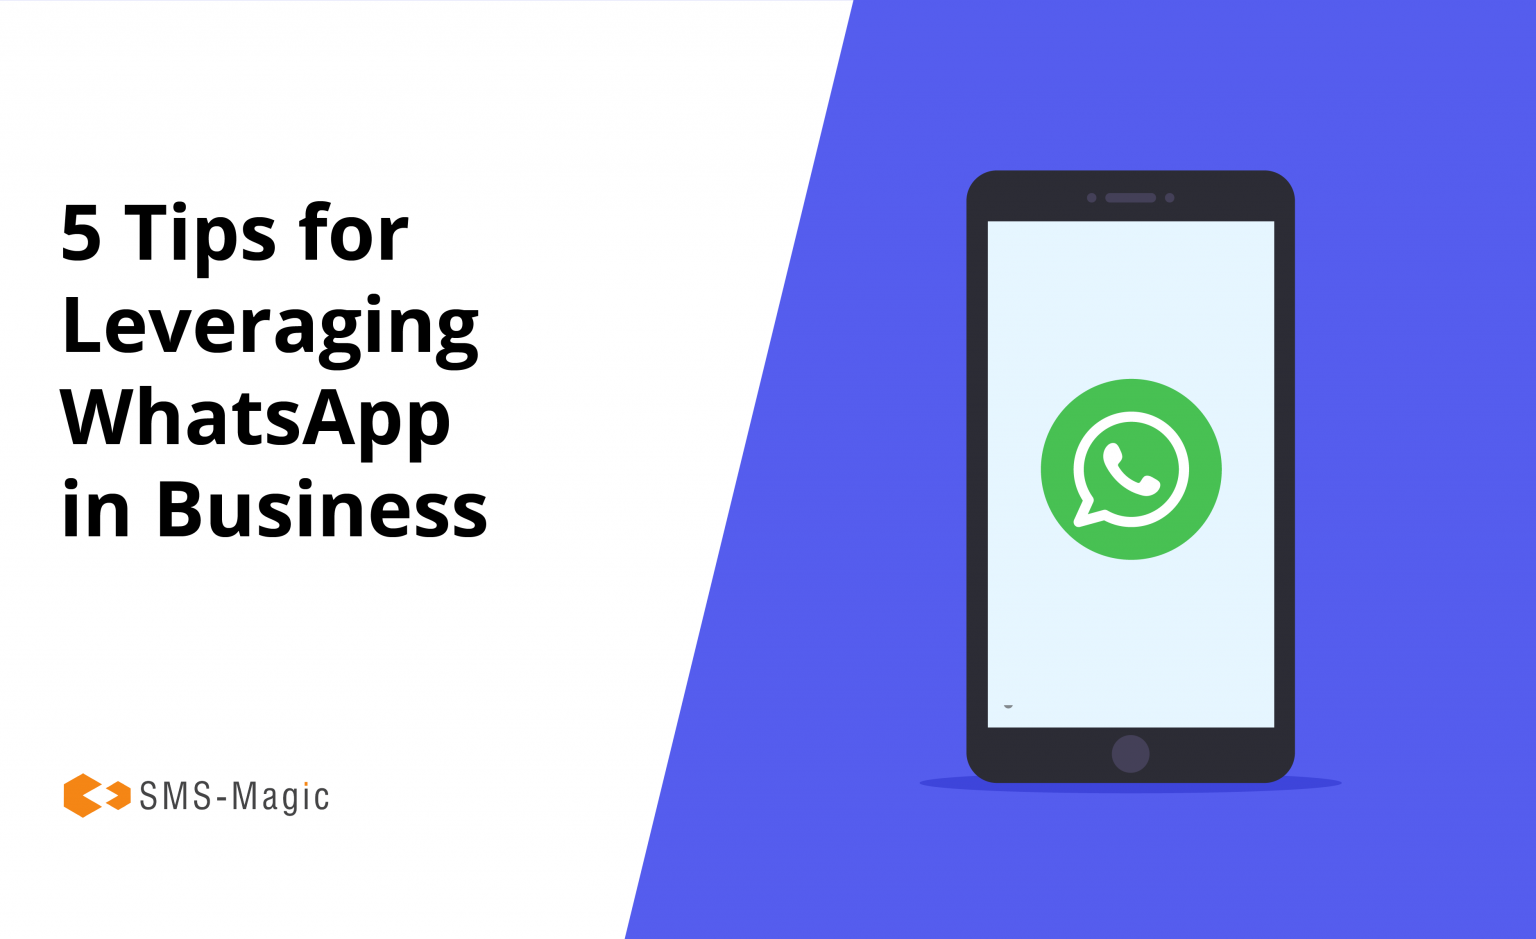 5 Tips for Leveraging WhatsApp in Business